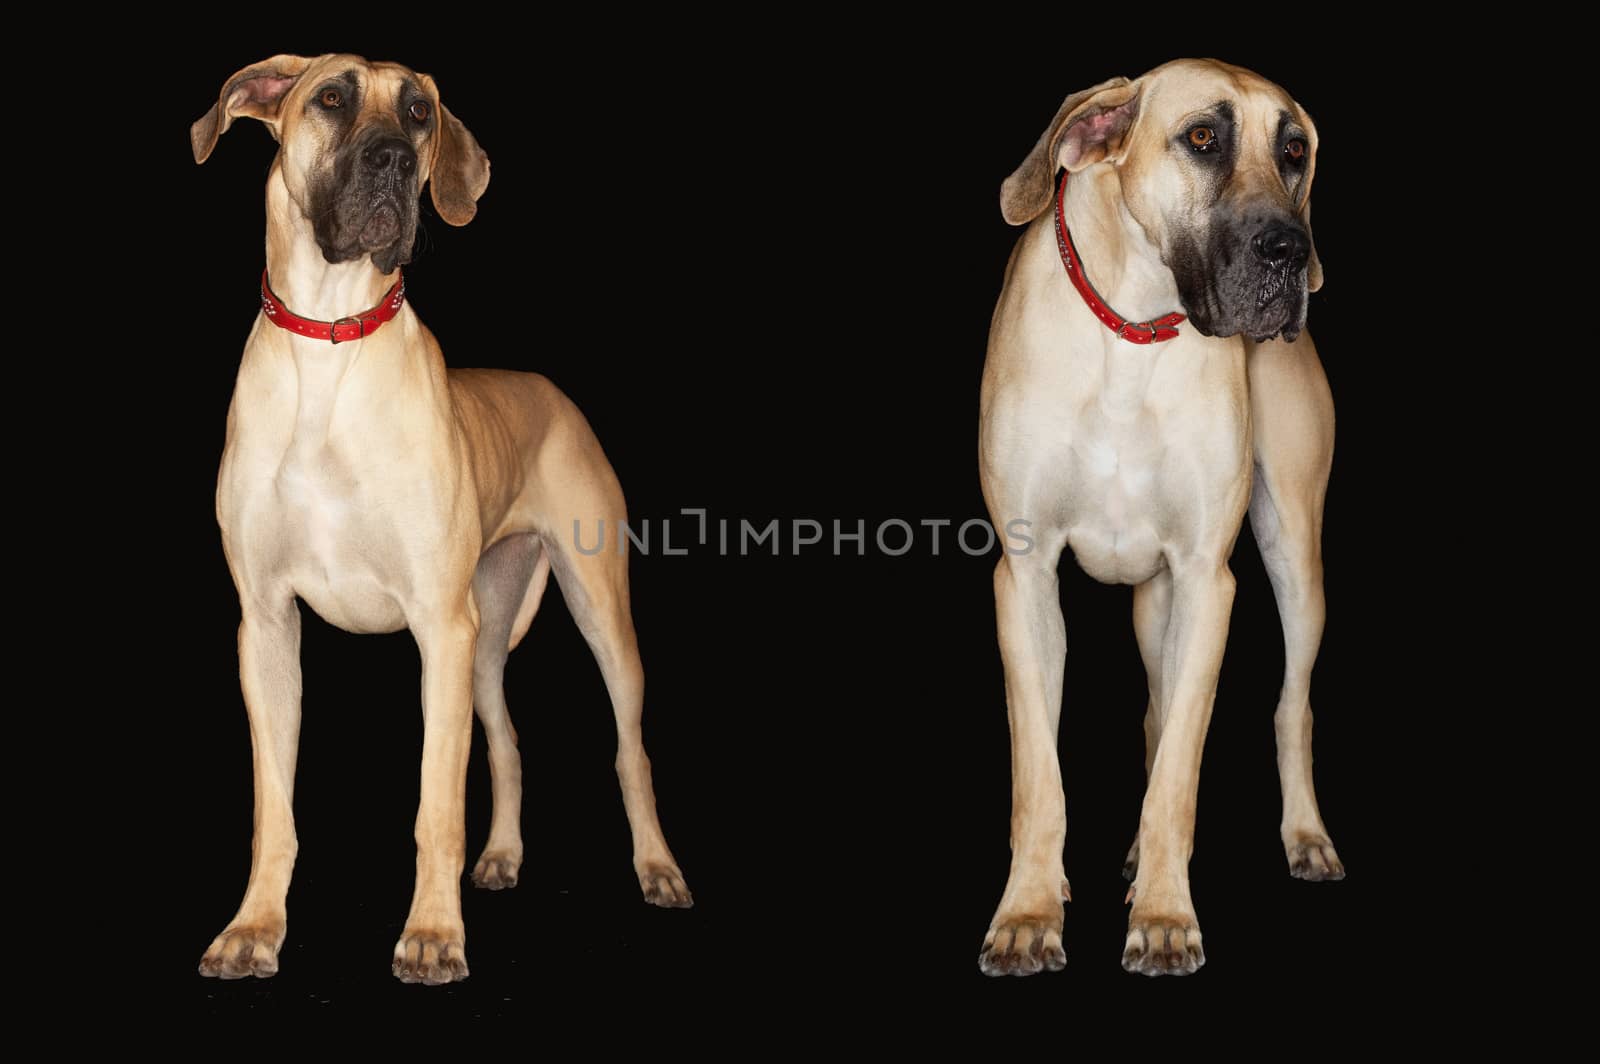 Two Great Danes standing side by side over black background by moodboard